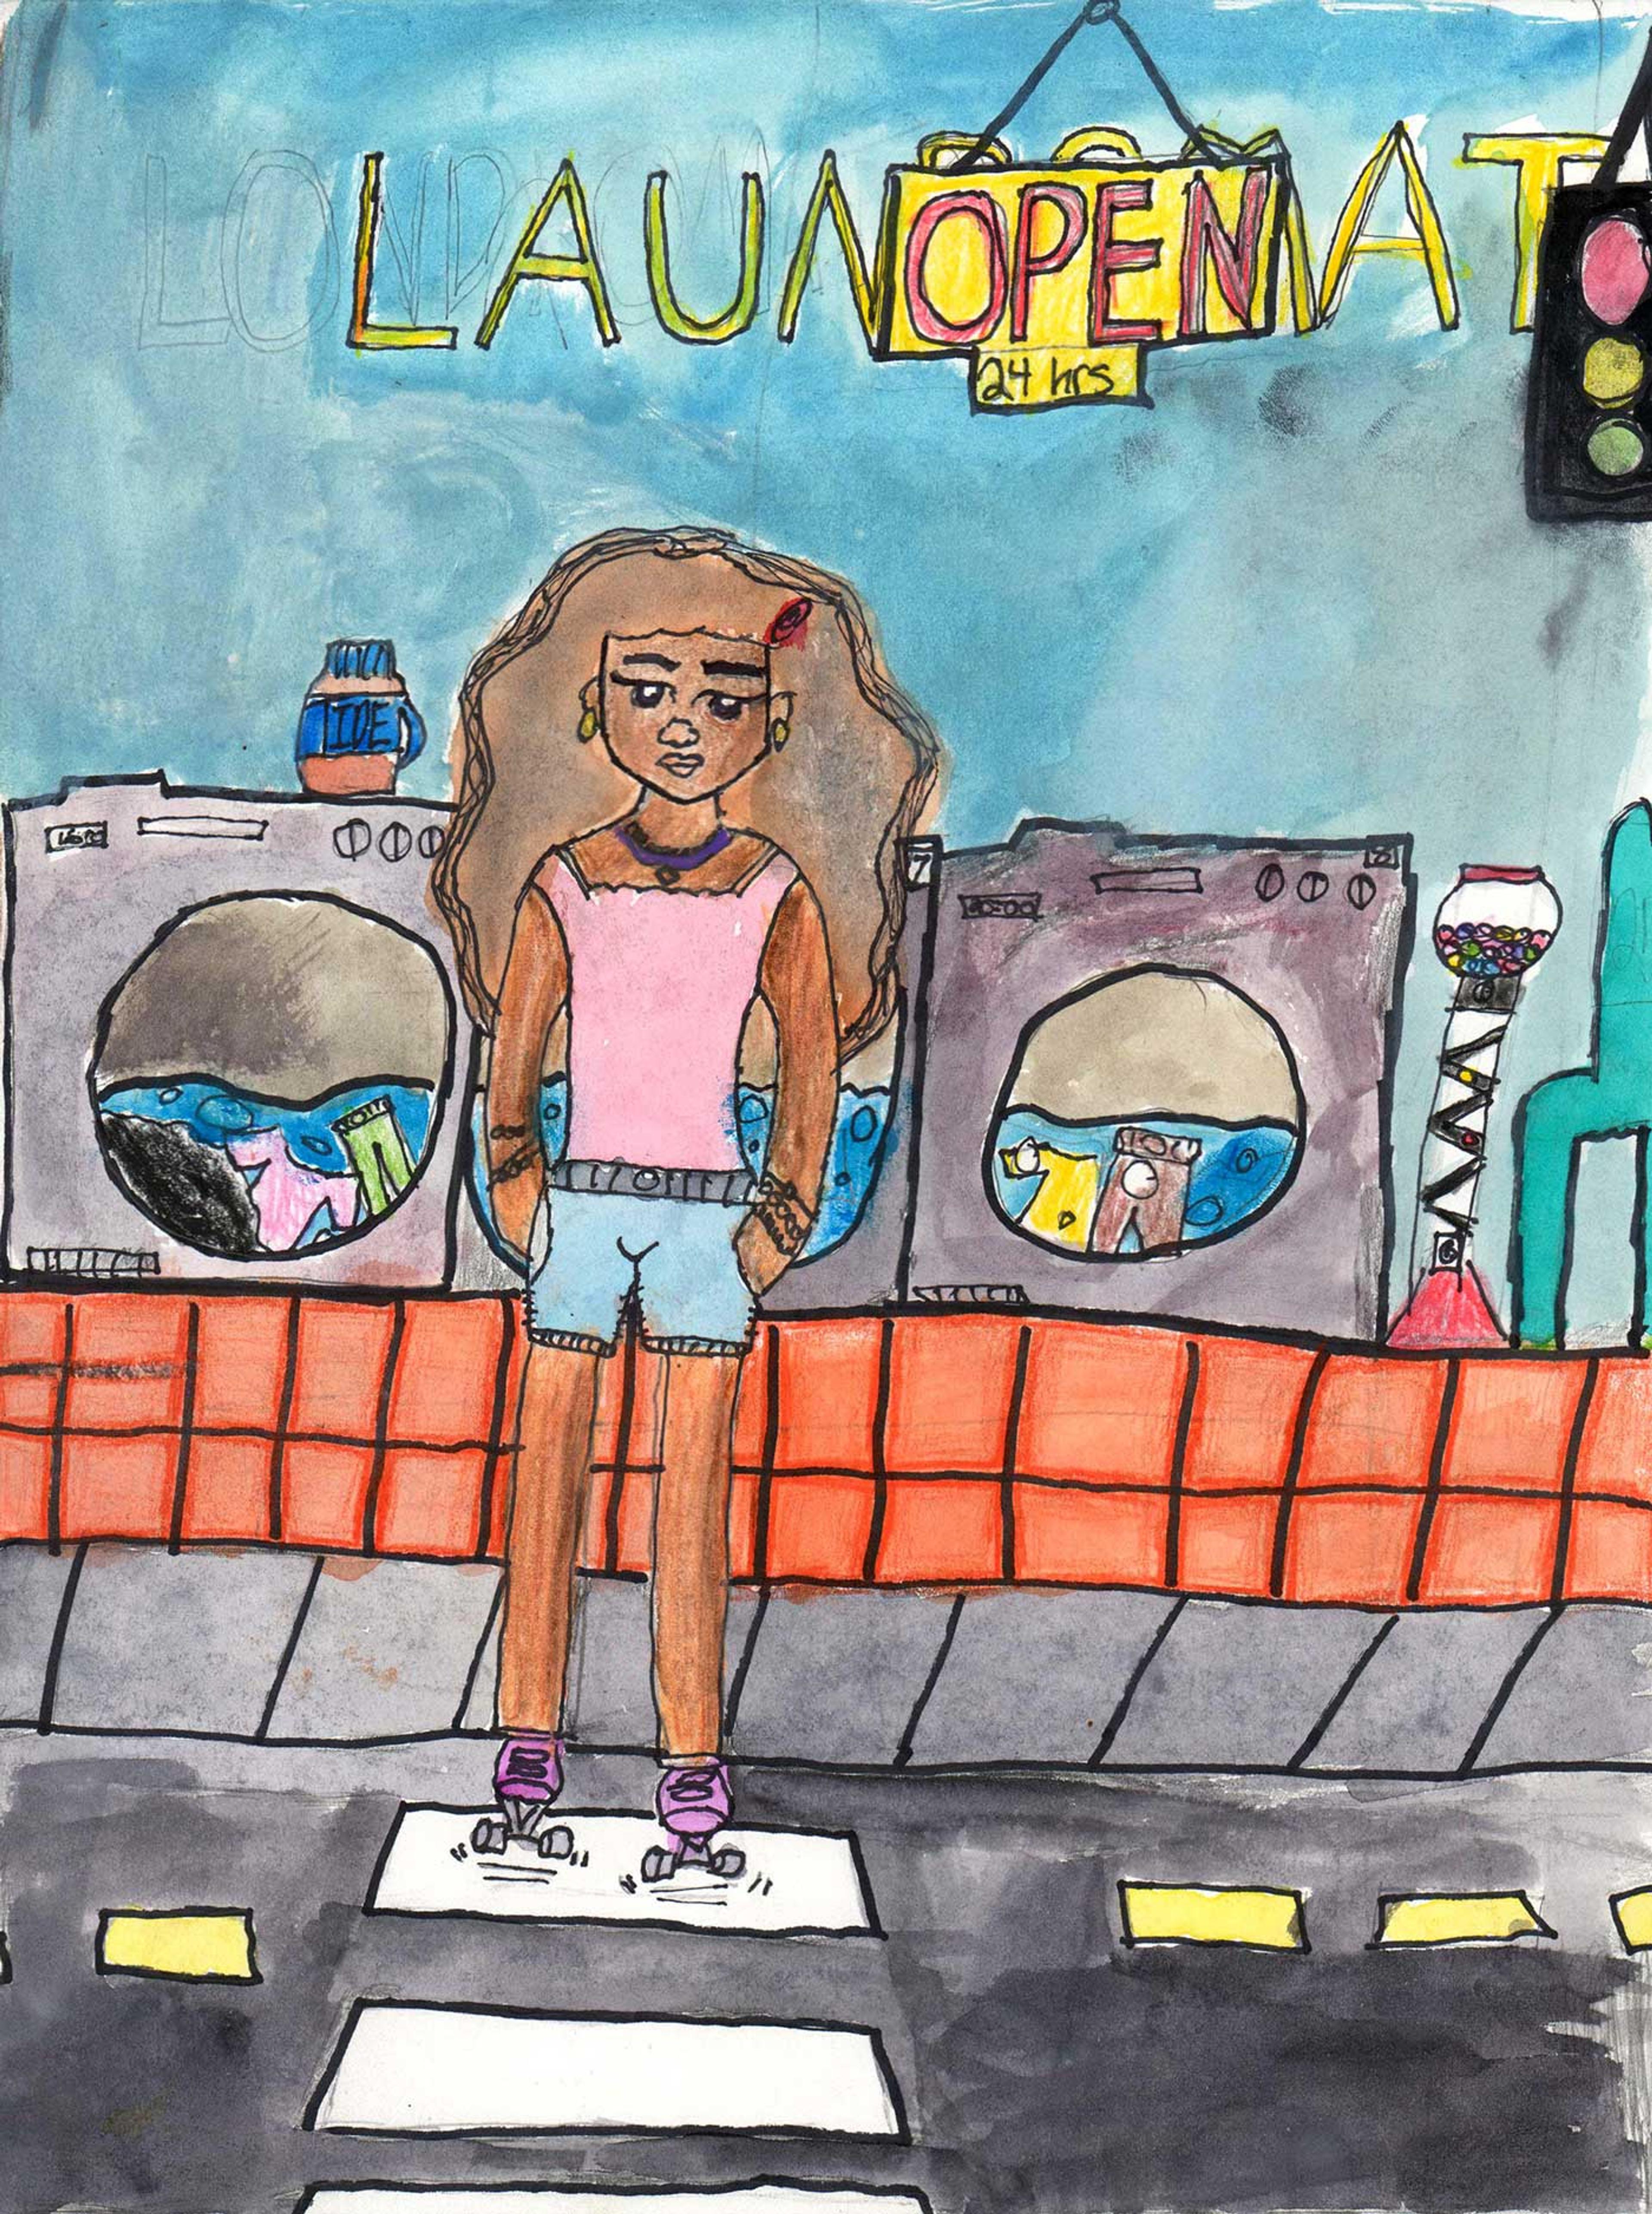 Painting of a girl on roller skates standing in front of a laudromat.